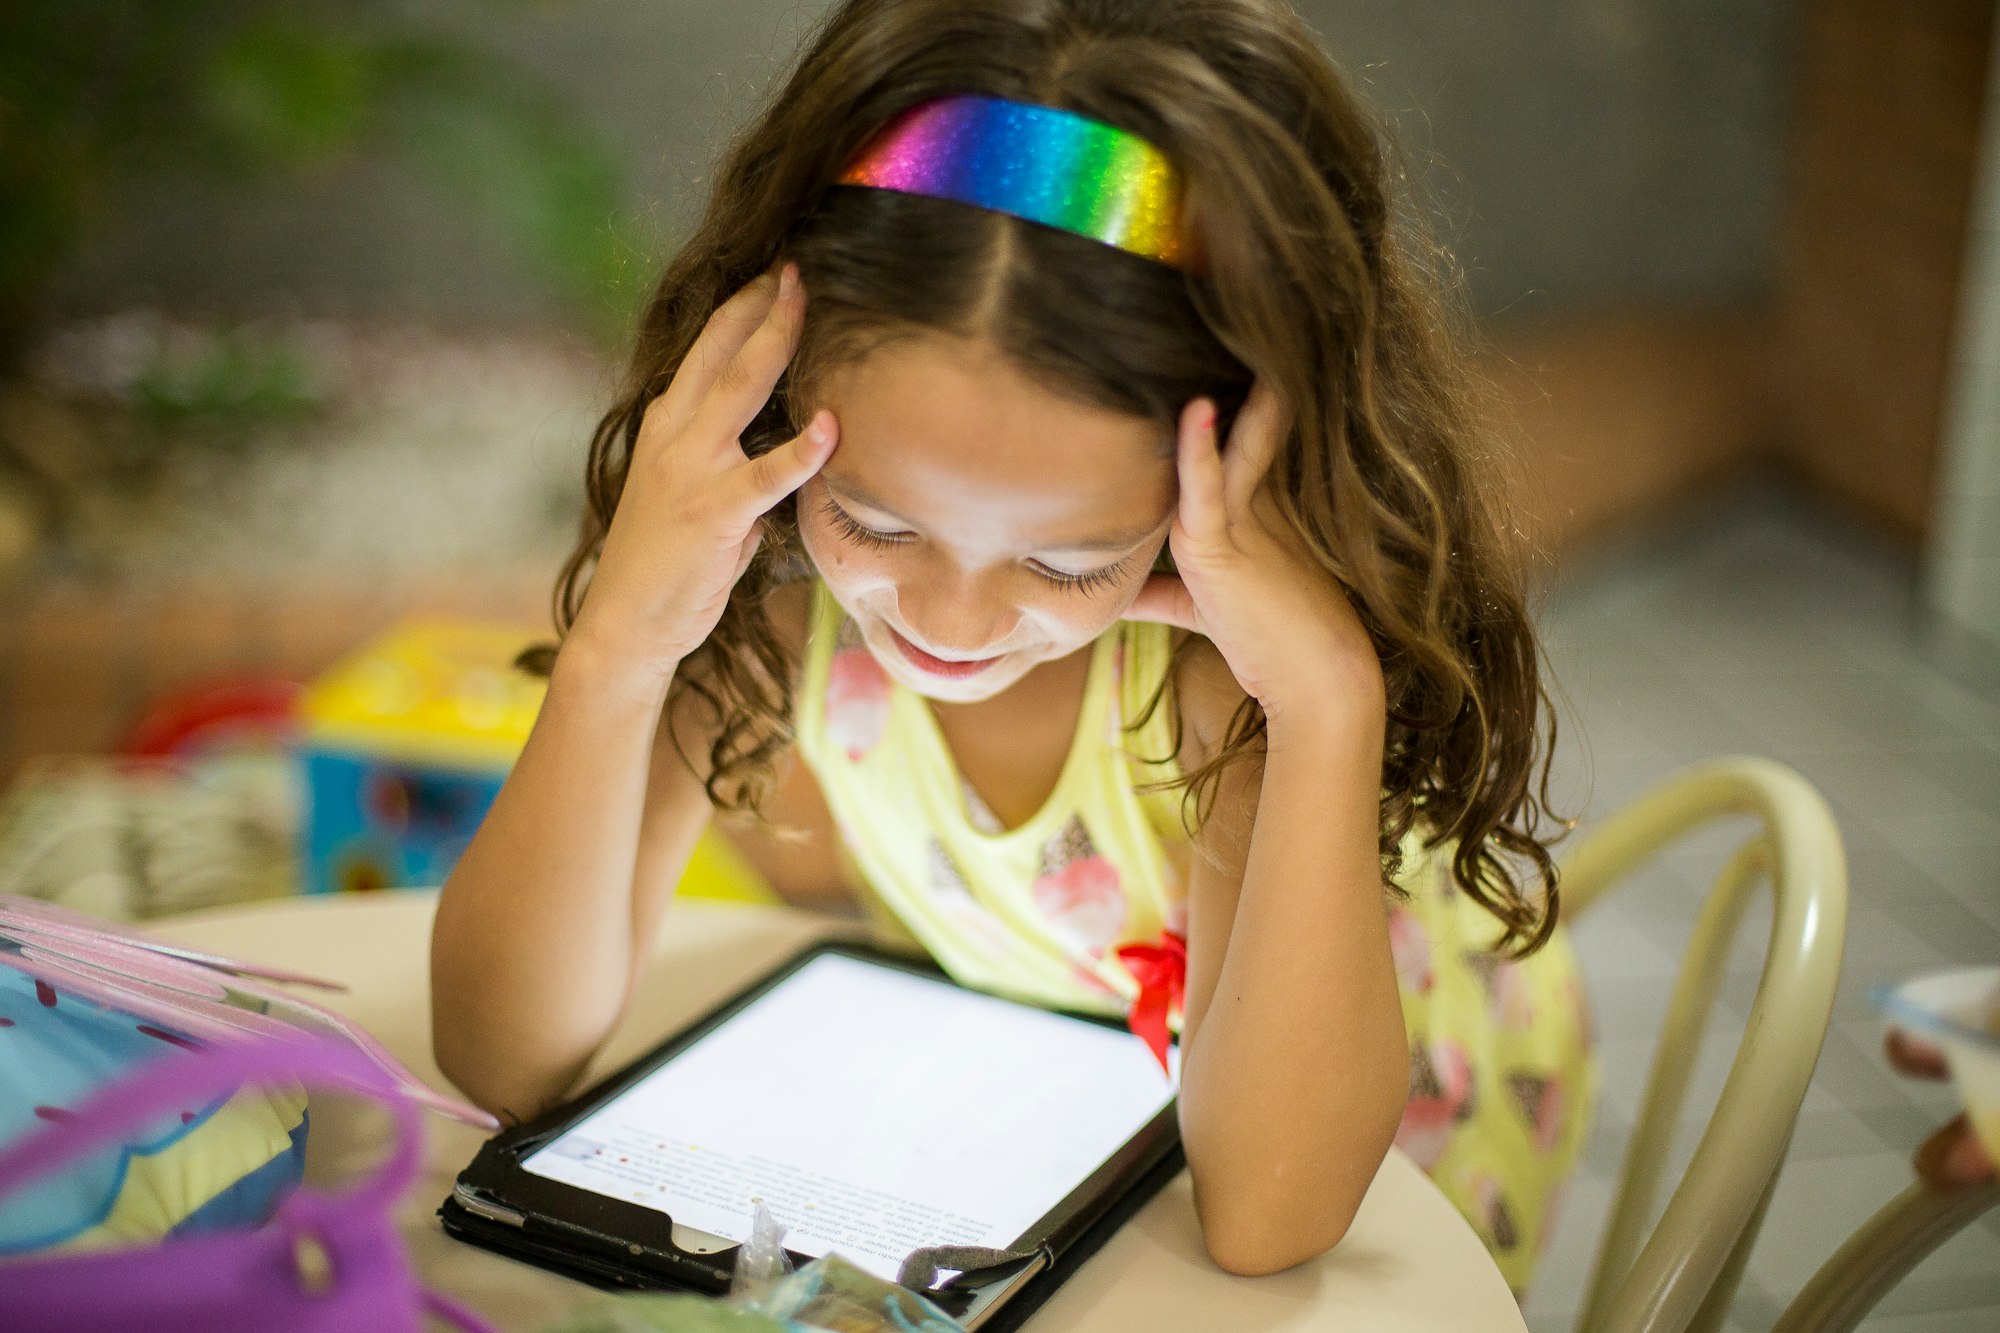 A young girl wearing a rainbow-colored headband while looking at her iPad.